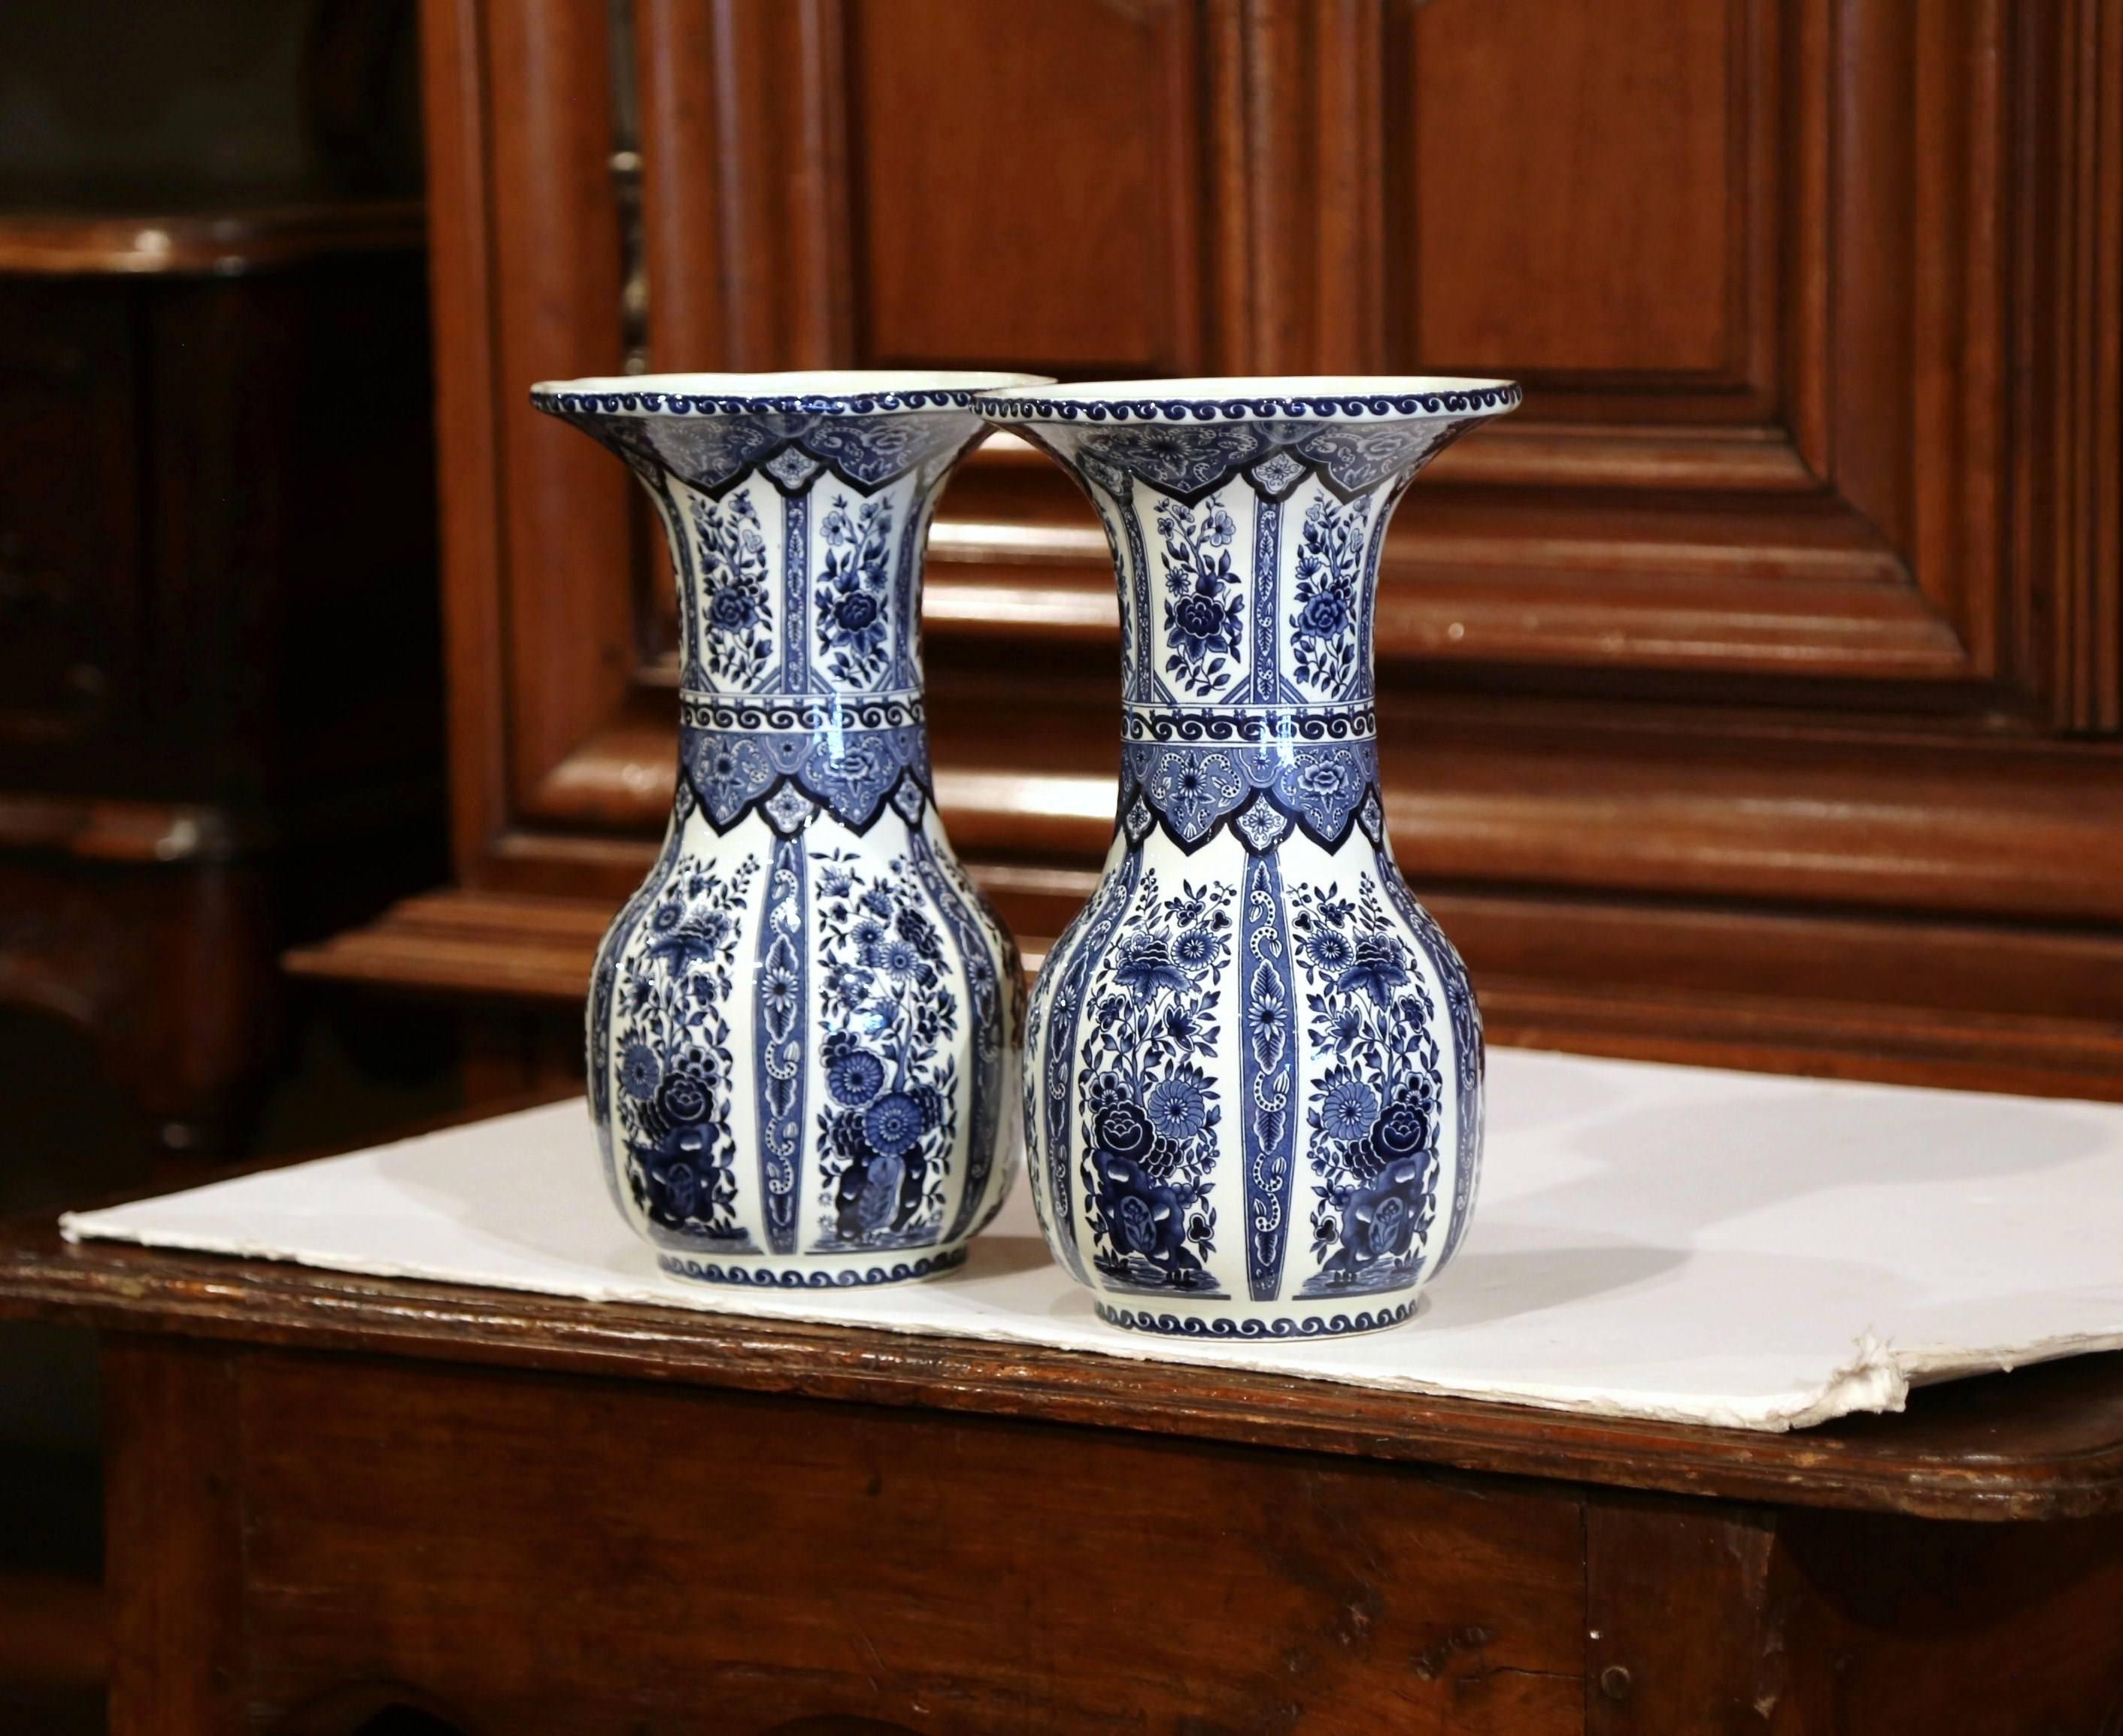 This vintage pair of ceramic Delft vases was created in Belgium, circa 1950. Round in shape, the ceramic flower vases feature traditional hand-painted floral decorations. They are stamped on the bottom, Bosh Belgium Delft. The porcelain pieces are